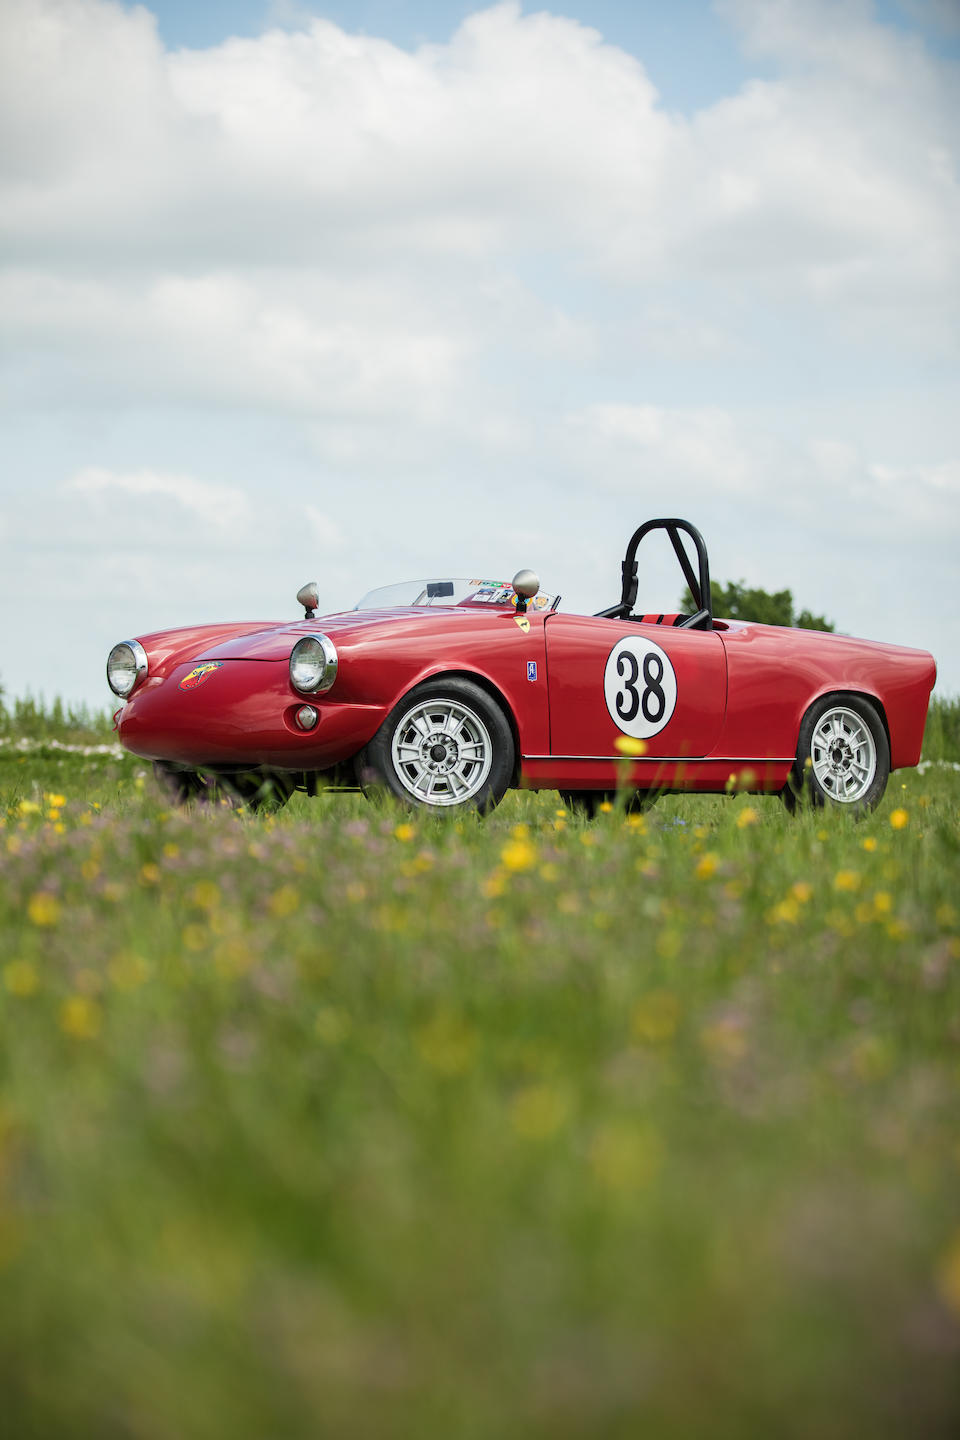 <b>1959 Abarth Allemano Spyder</b><br />Chassis no. 100-502156